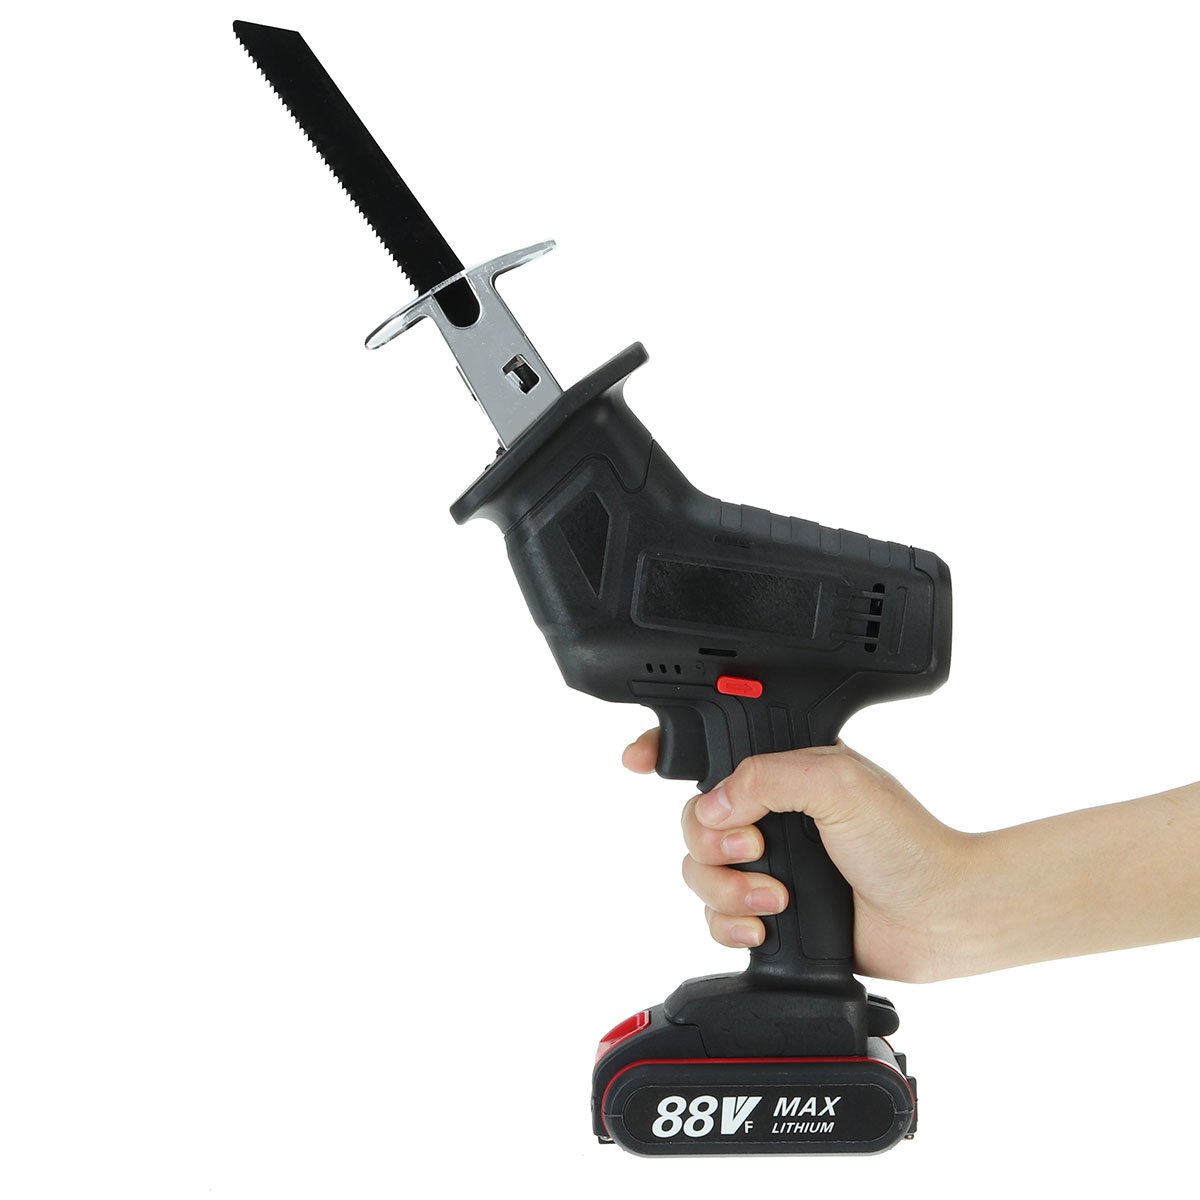 88VF-Cordless-Rechargeable-Electric-Reciprocating-Saw-Portable-Wood-Metal-Plastic-Cutting-Tool-W-1-o-1772566-10